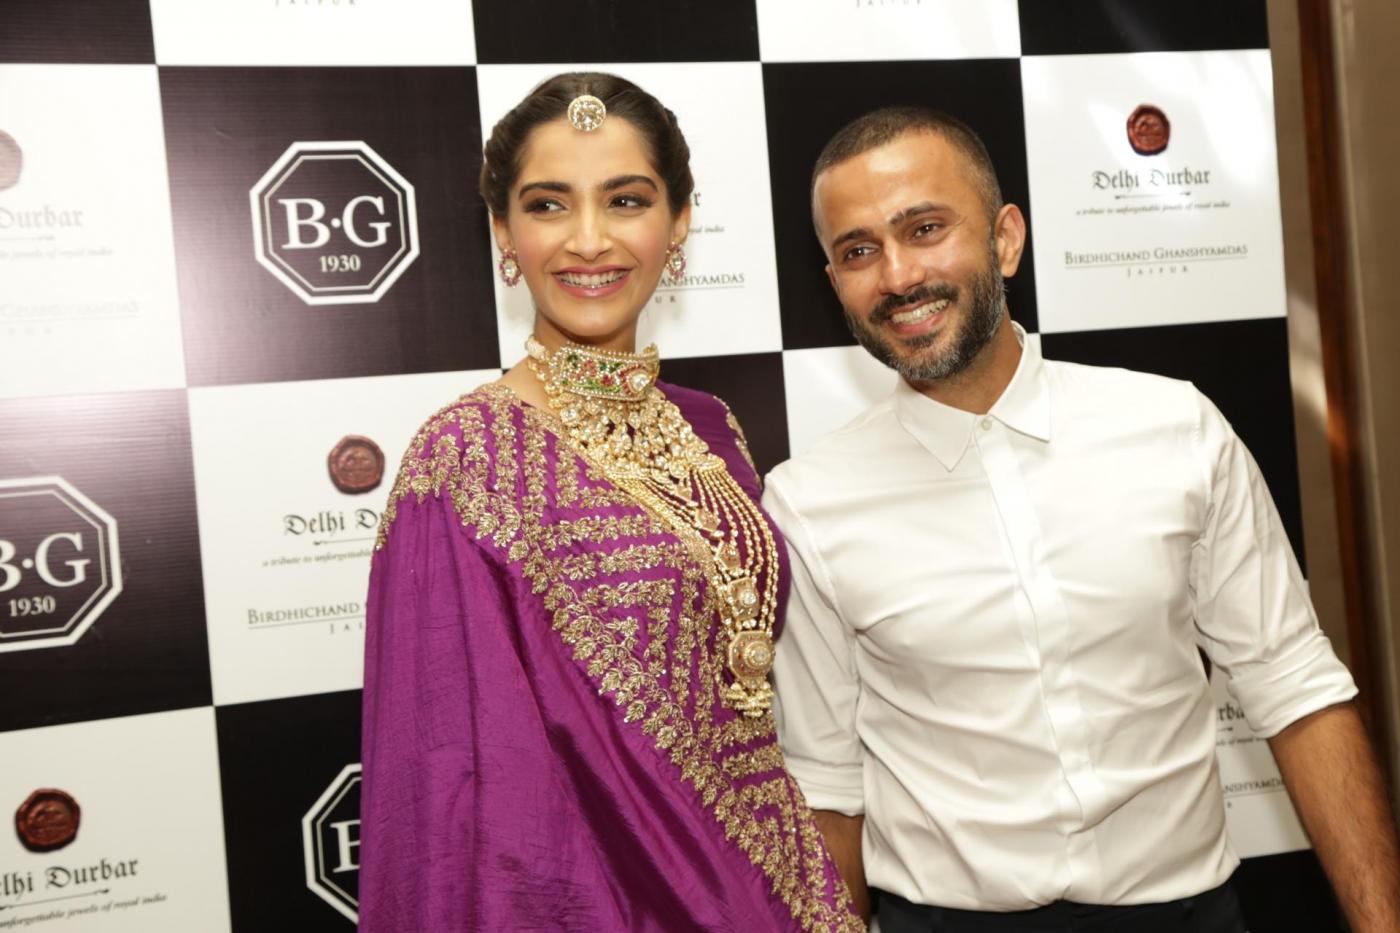 New Delhi: Actress Sonam Kapoor Ahuja along with her husband Anand Ahuja at jewellery collection show, in New Delhi on 8 Sept. 2018. (Photo: Amlan Paliwal/IANS) by .